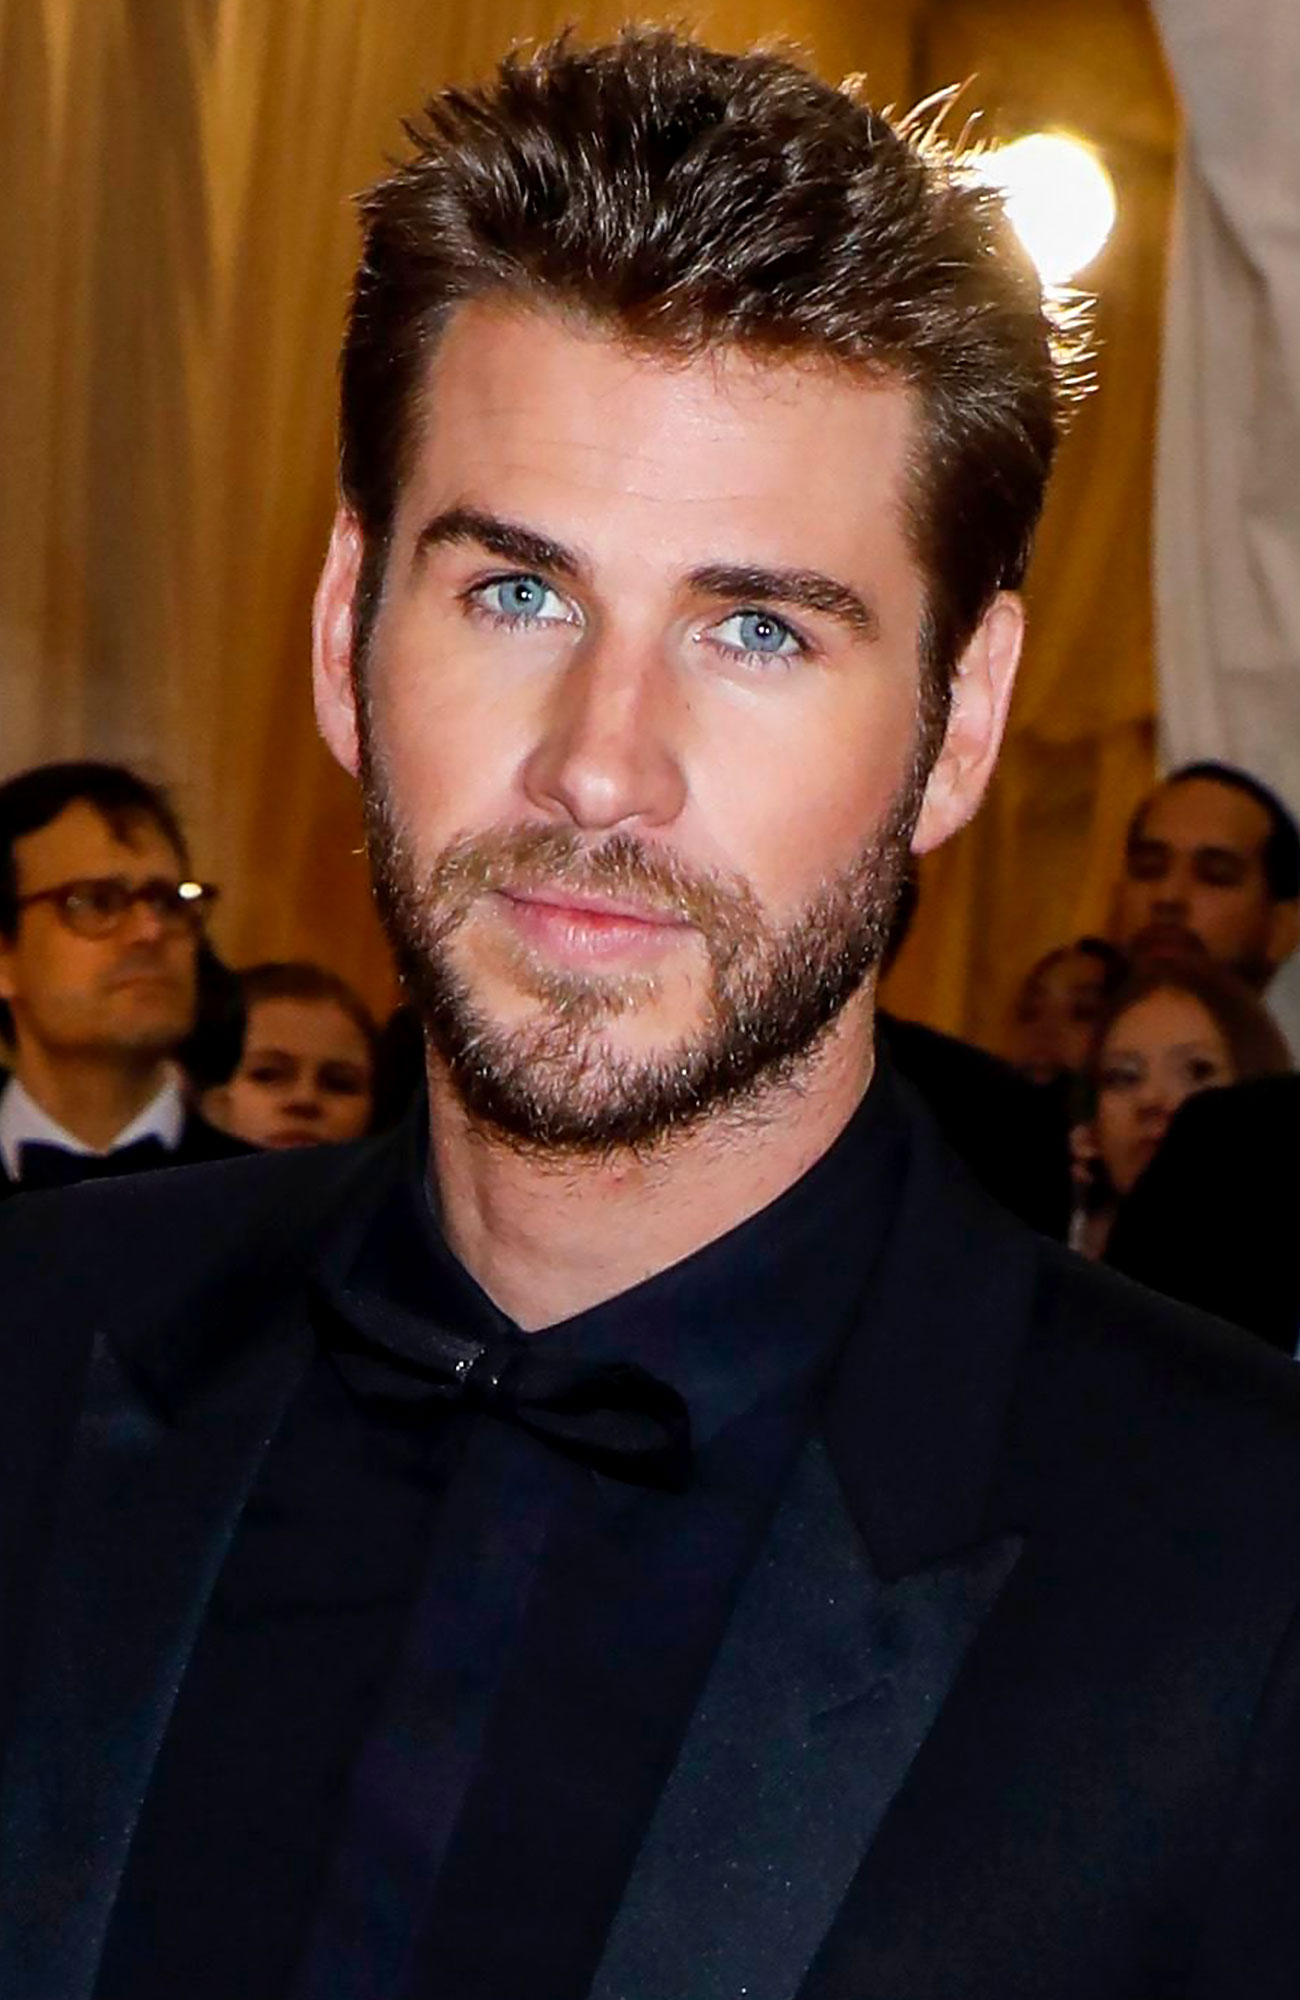 Fabulous Facial Hair! These Are Hands-Down the Best Beards in Hollywood